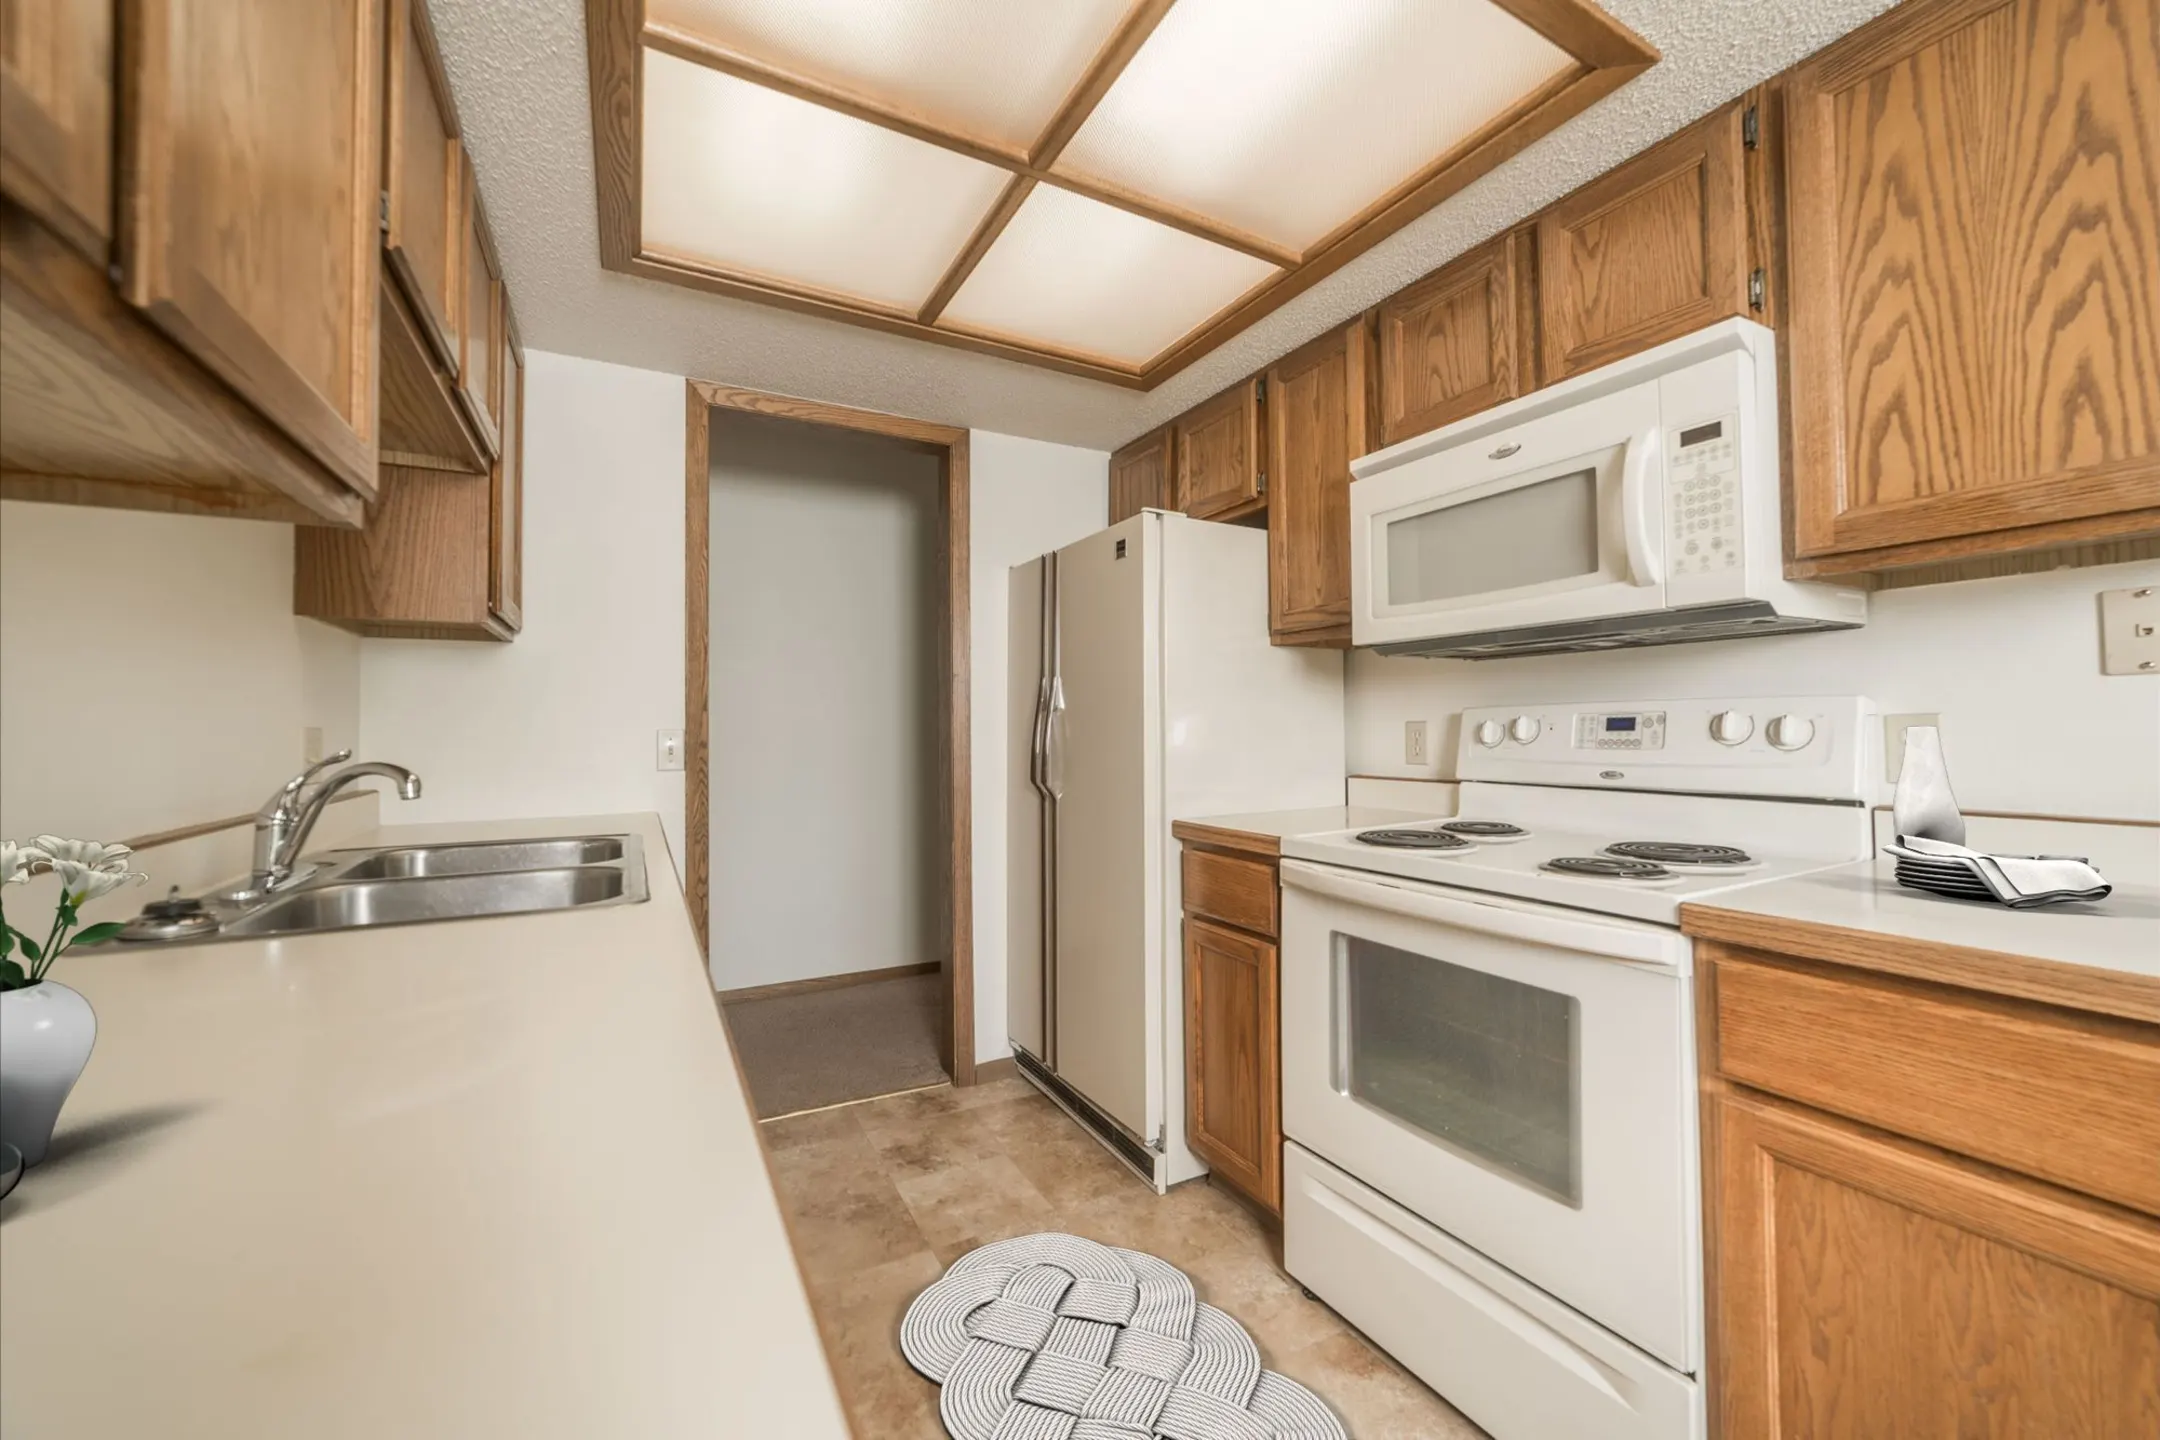 Kitchen - The Concorde Apartments - Sioux Falls, SD